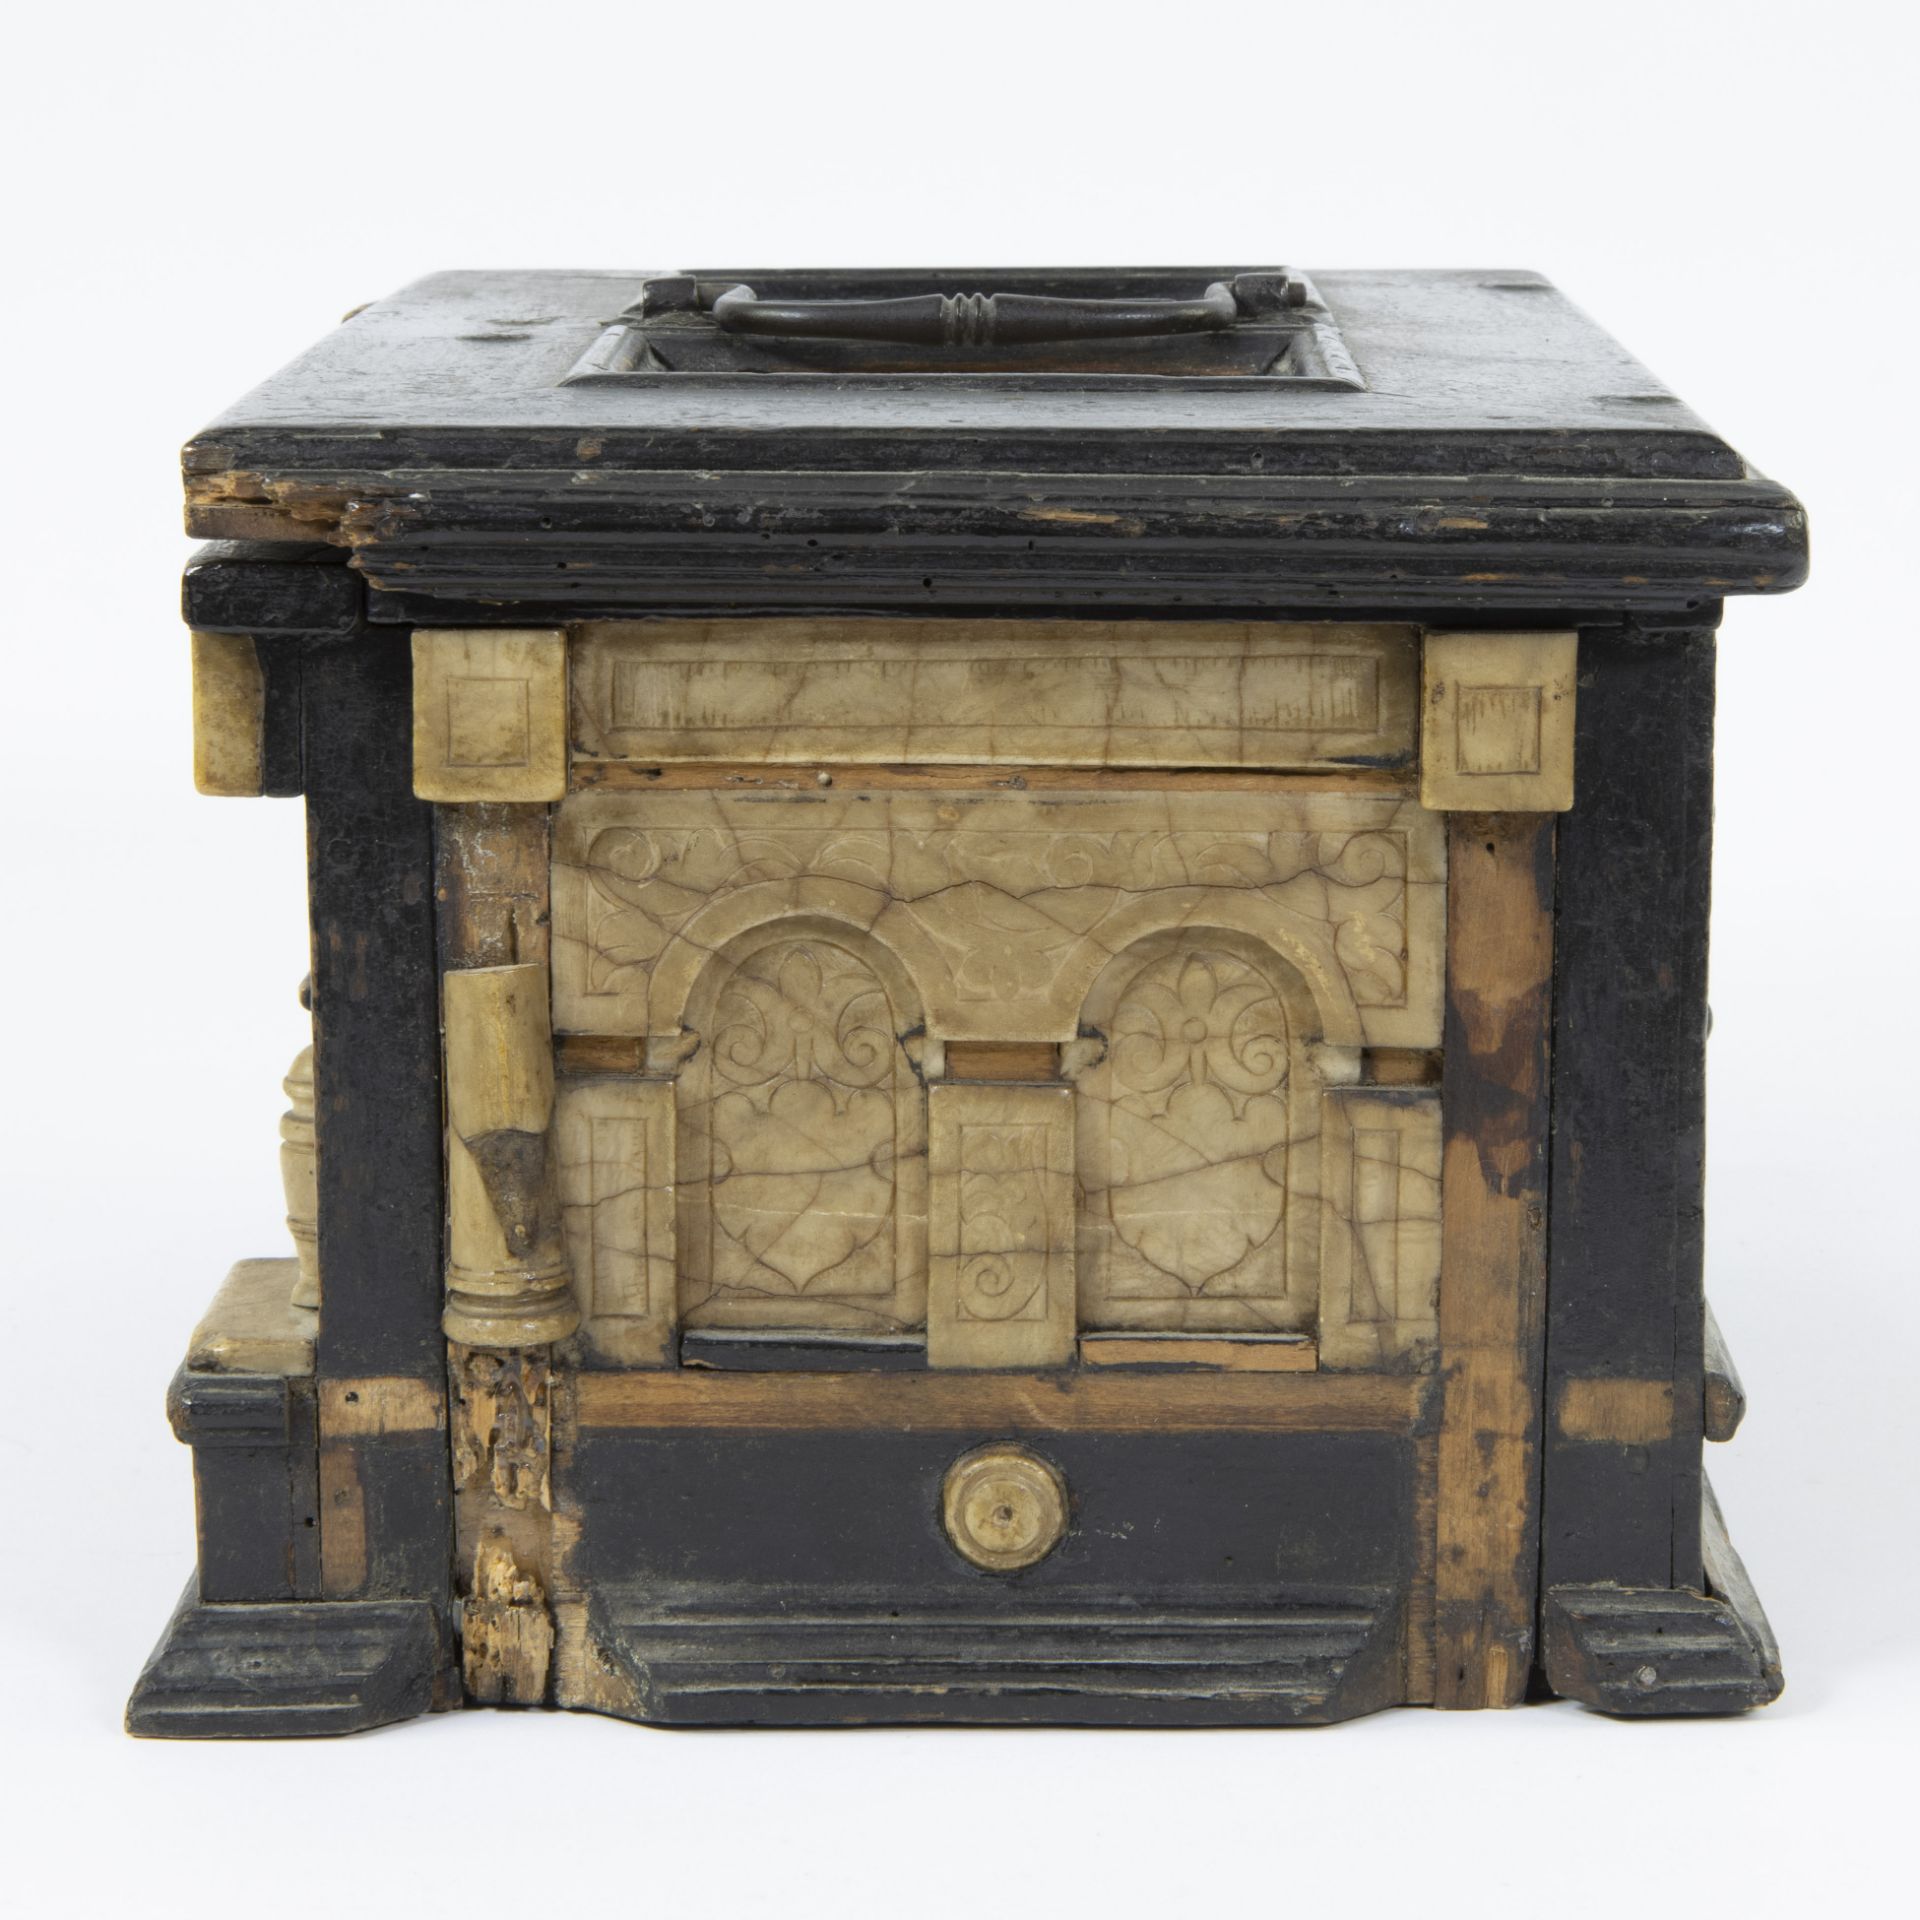 An early 17th century ebonised and alabaster table casket, Malines, circa 1630 - Image 3 of 6